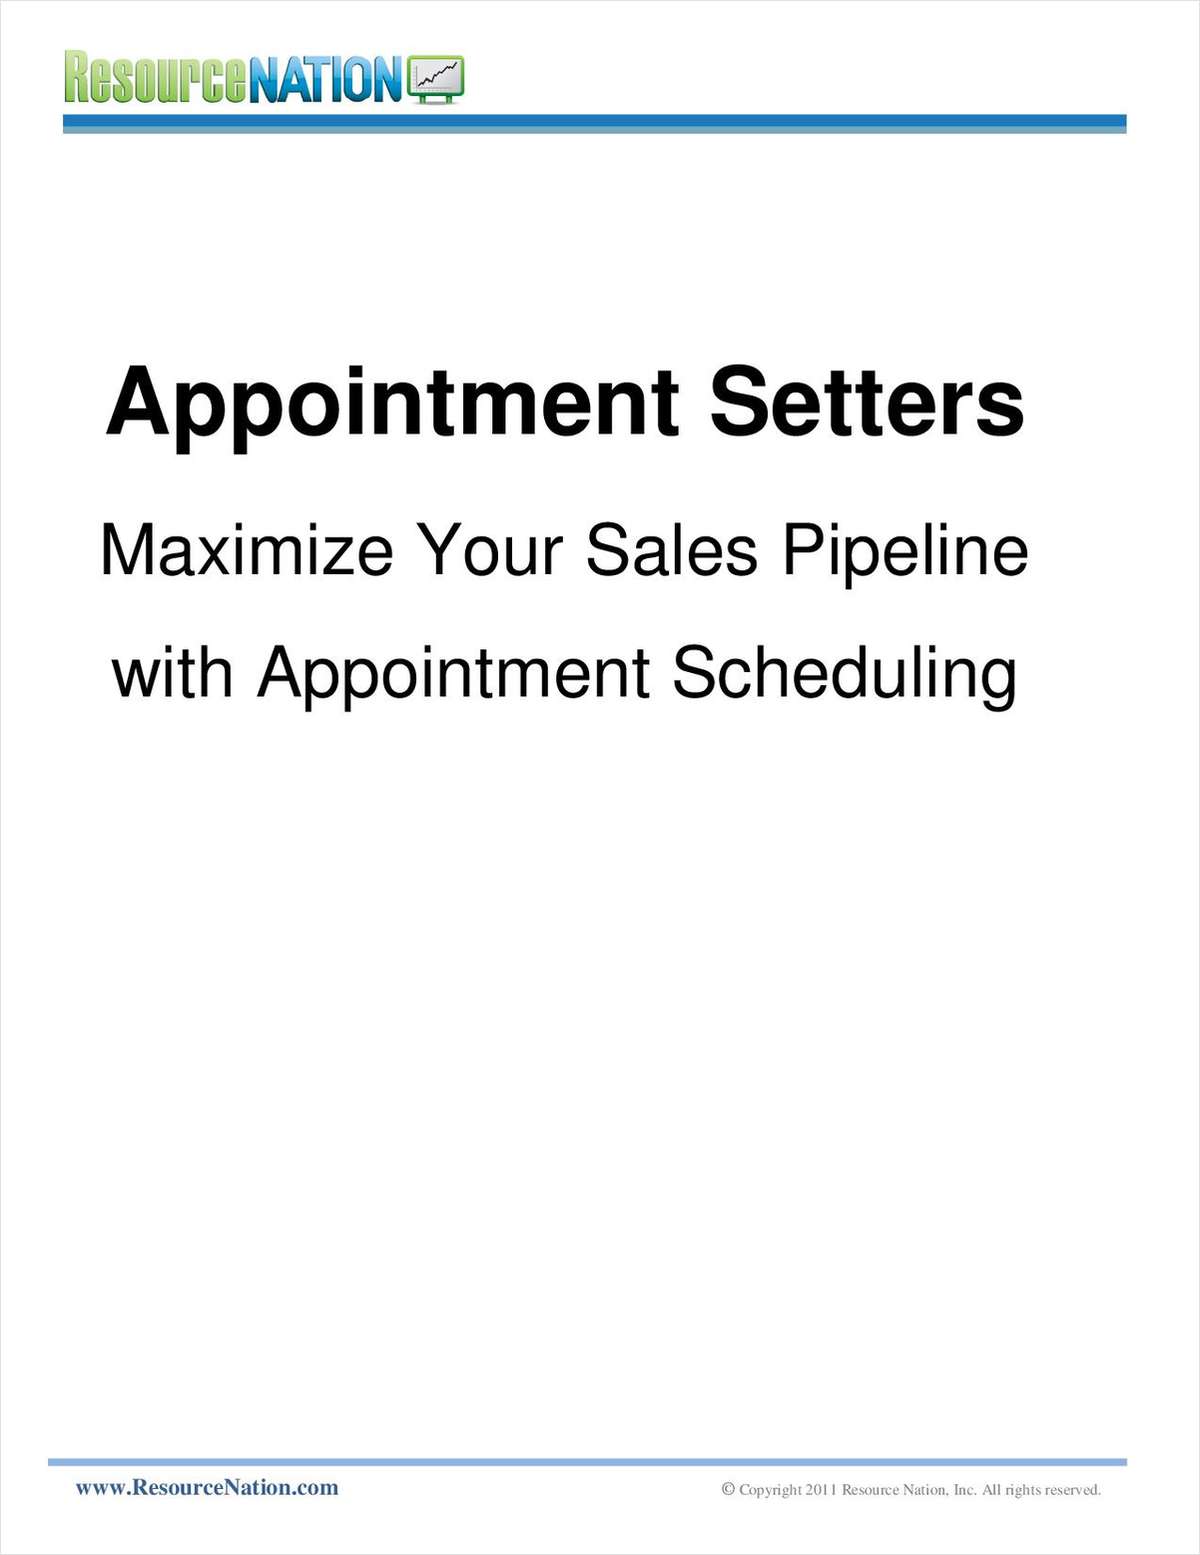 Maximize Your Sales Pipeline with an Appointment Scheduling Service